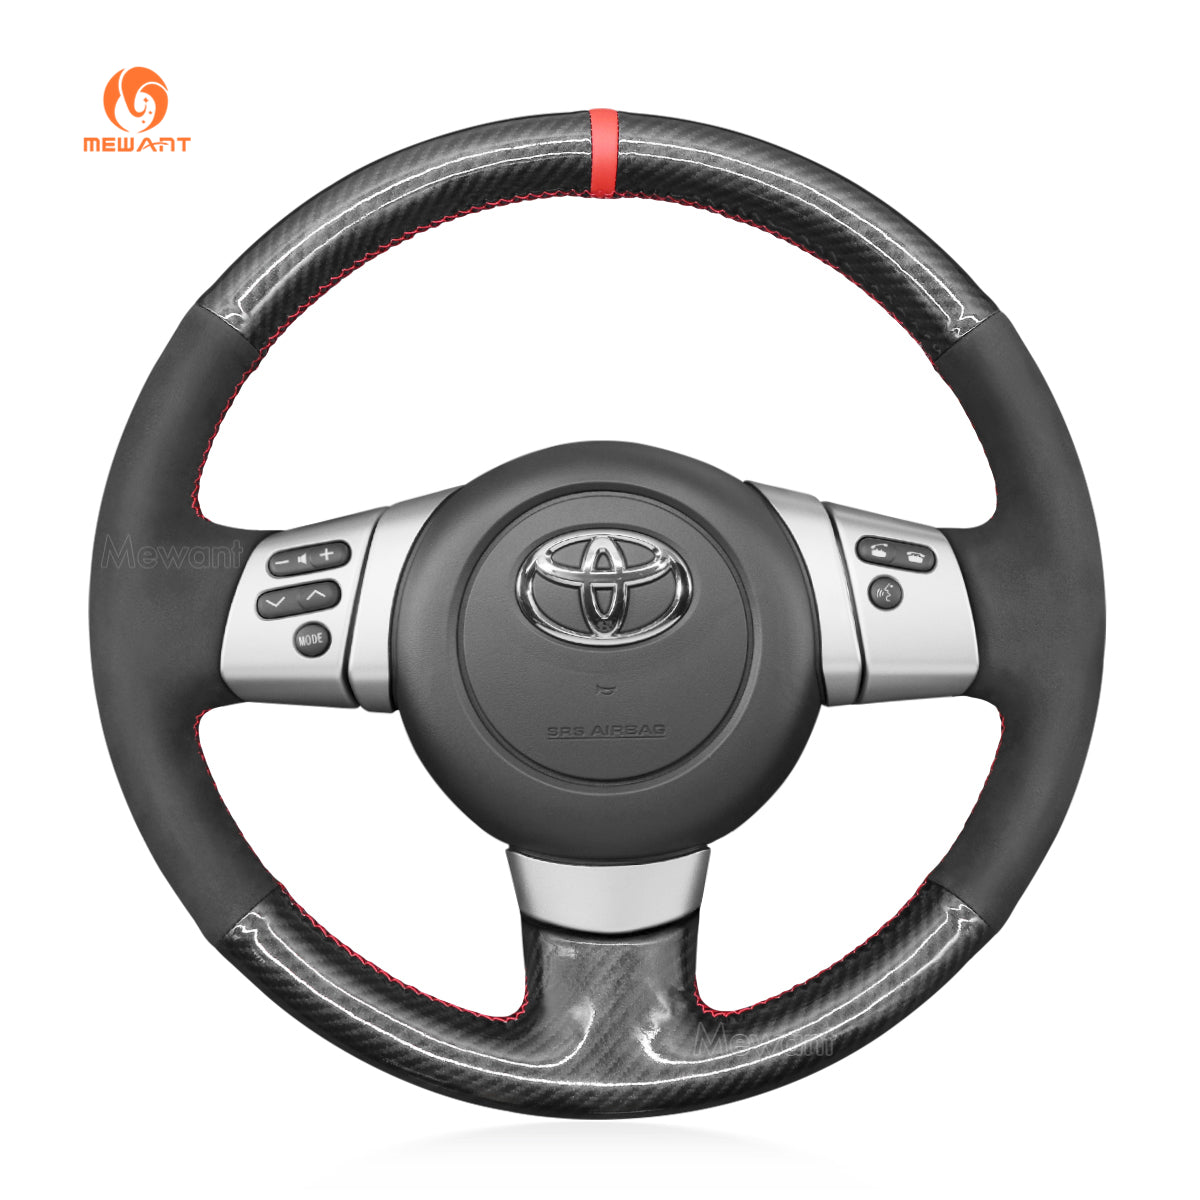 MEWANT Hand Stitch Black Leather Suede Car Steering Wheel Cover for Toyota FJ Cruiser 2011-2016